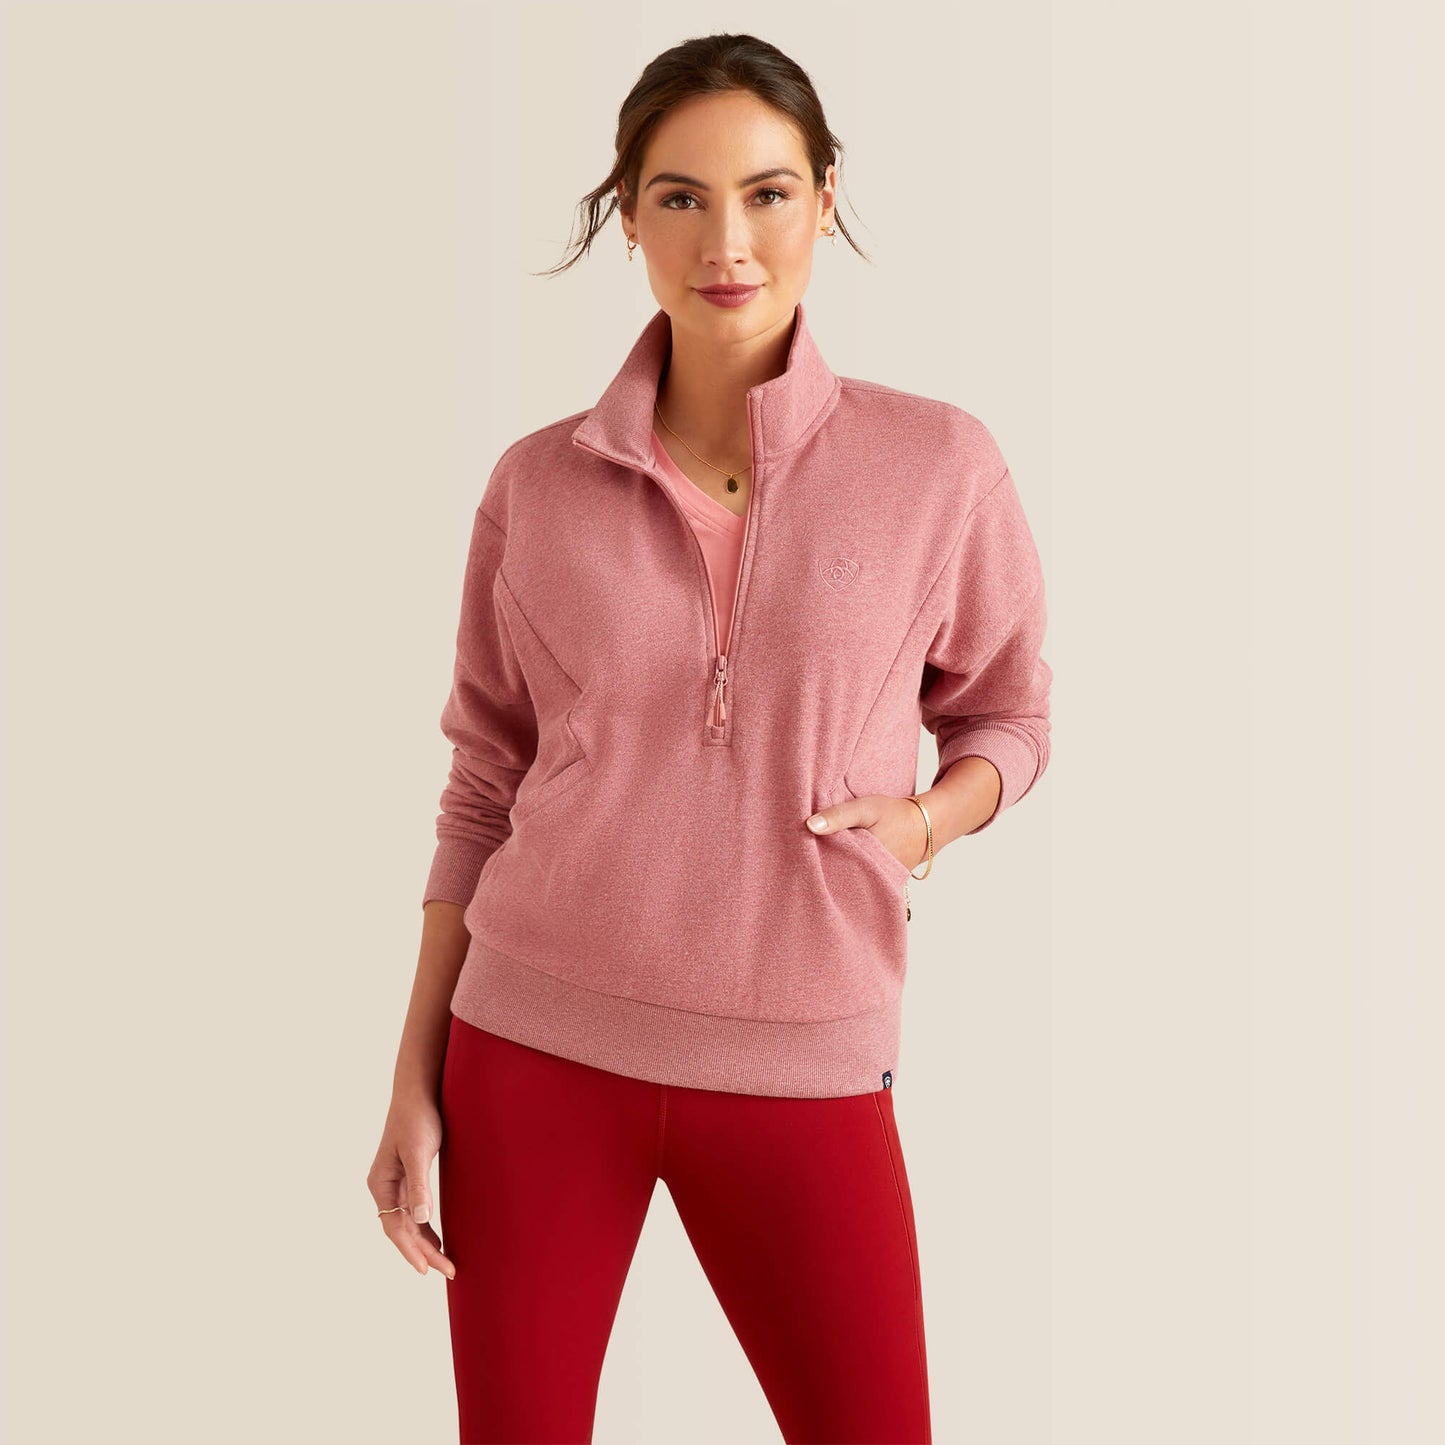 THE COTTON CANDY 1/2 ZIP {ARIAT}